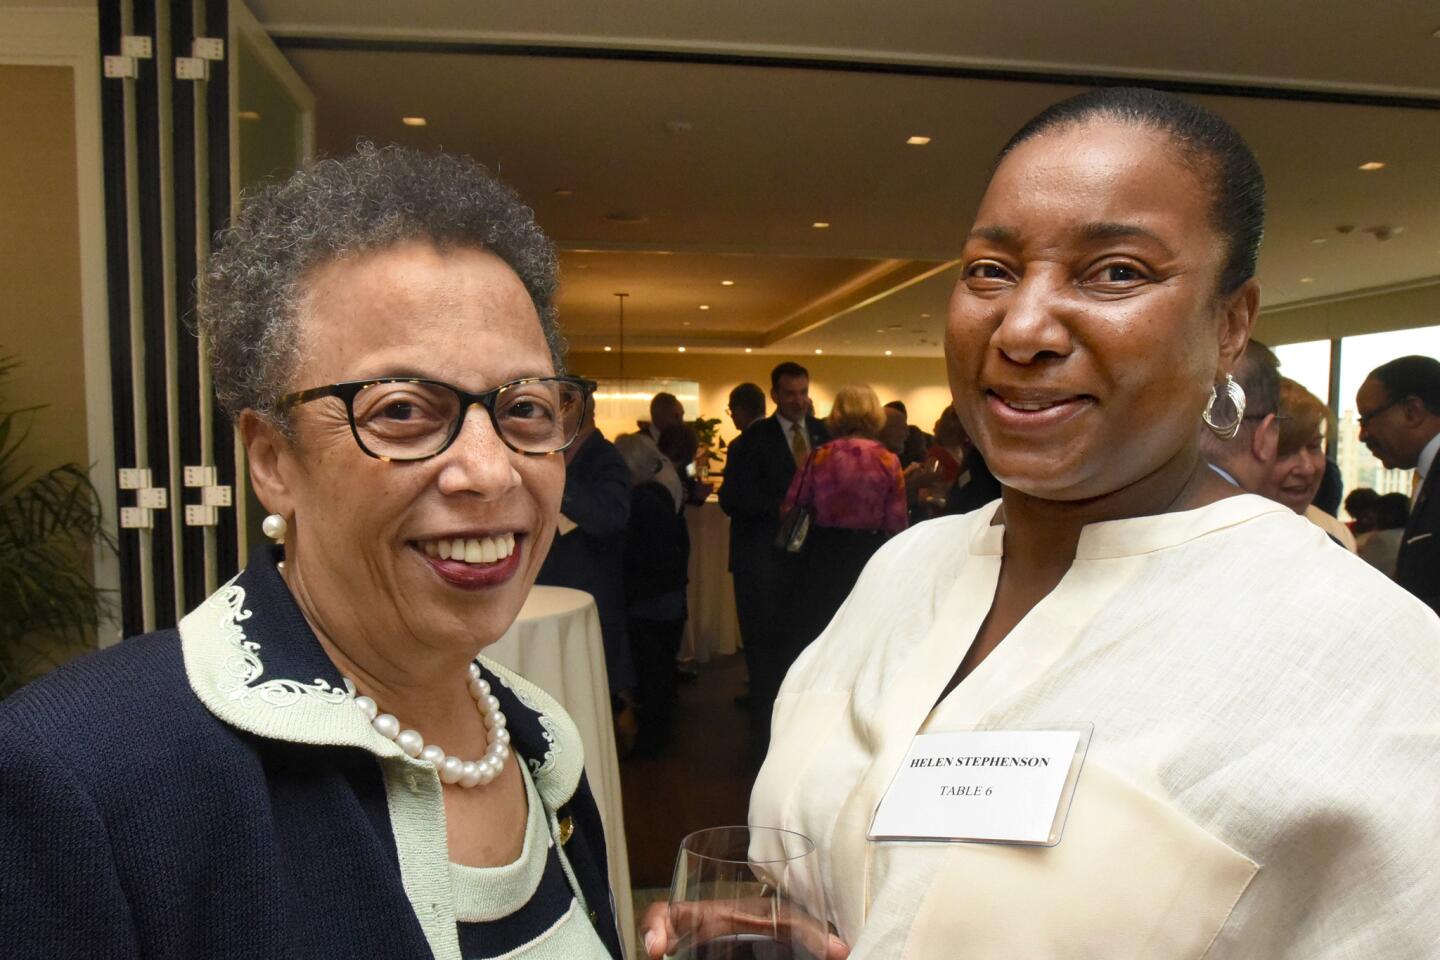 Sharon Warren and Helen Stephenson at the Baltimore Sun Hall of Fame party at the Center Club.